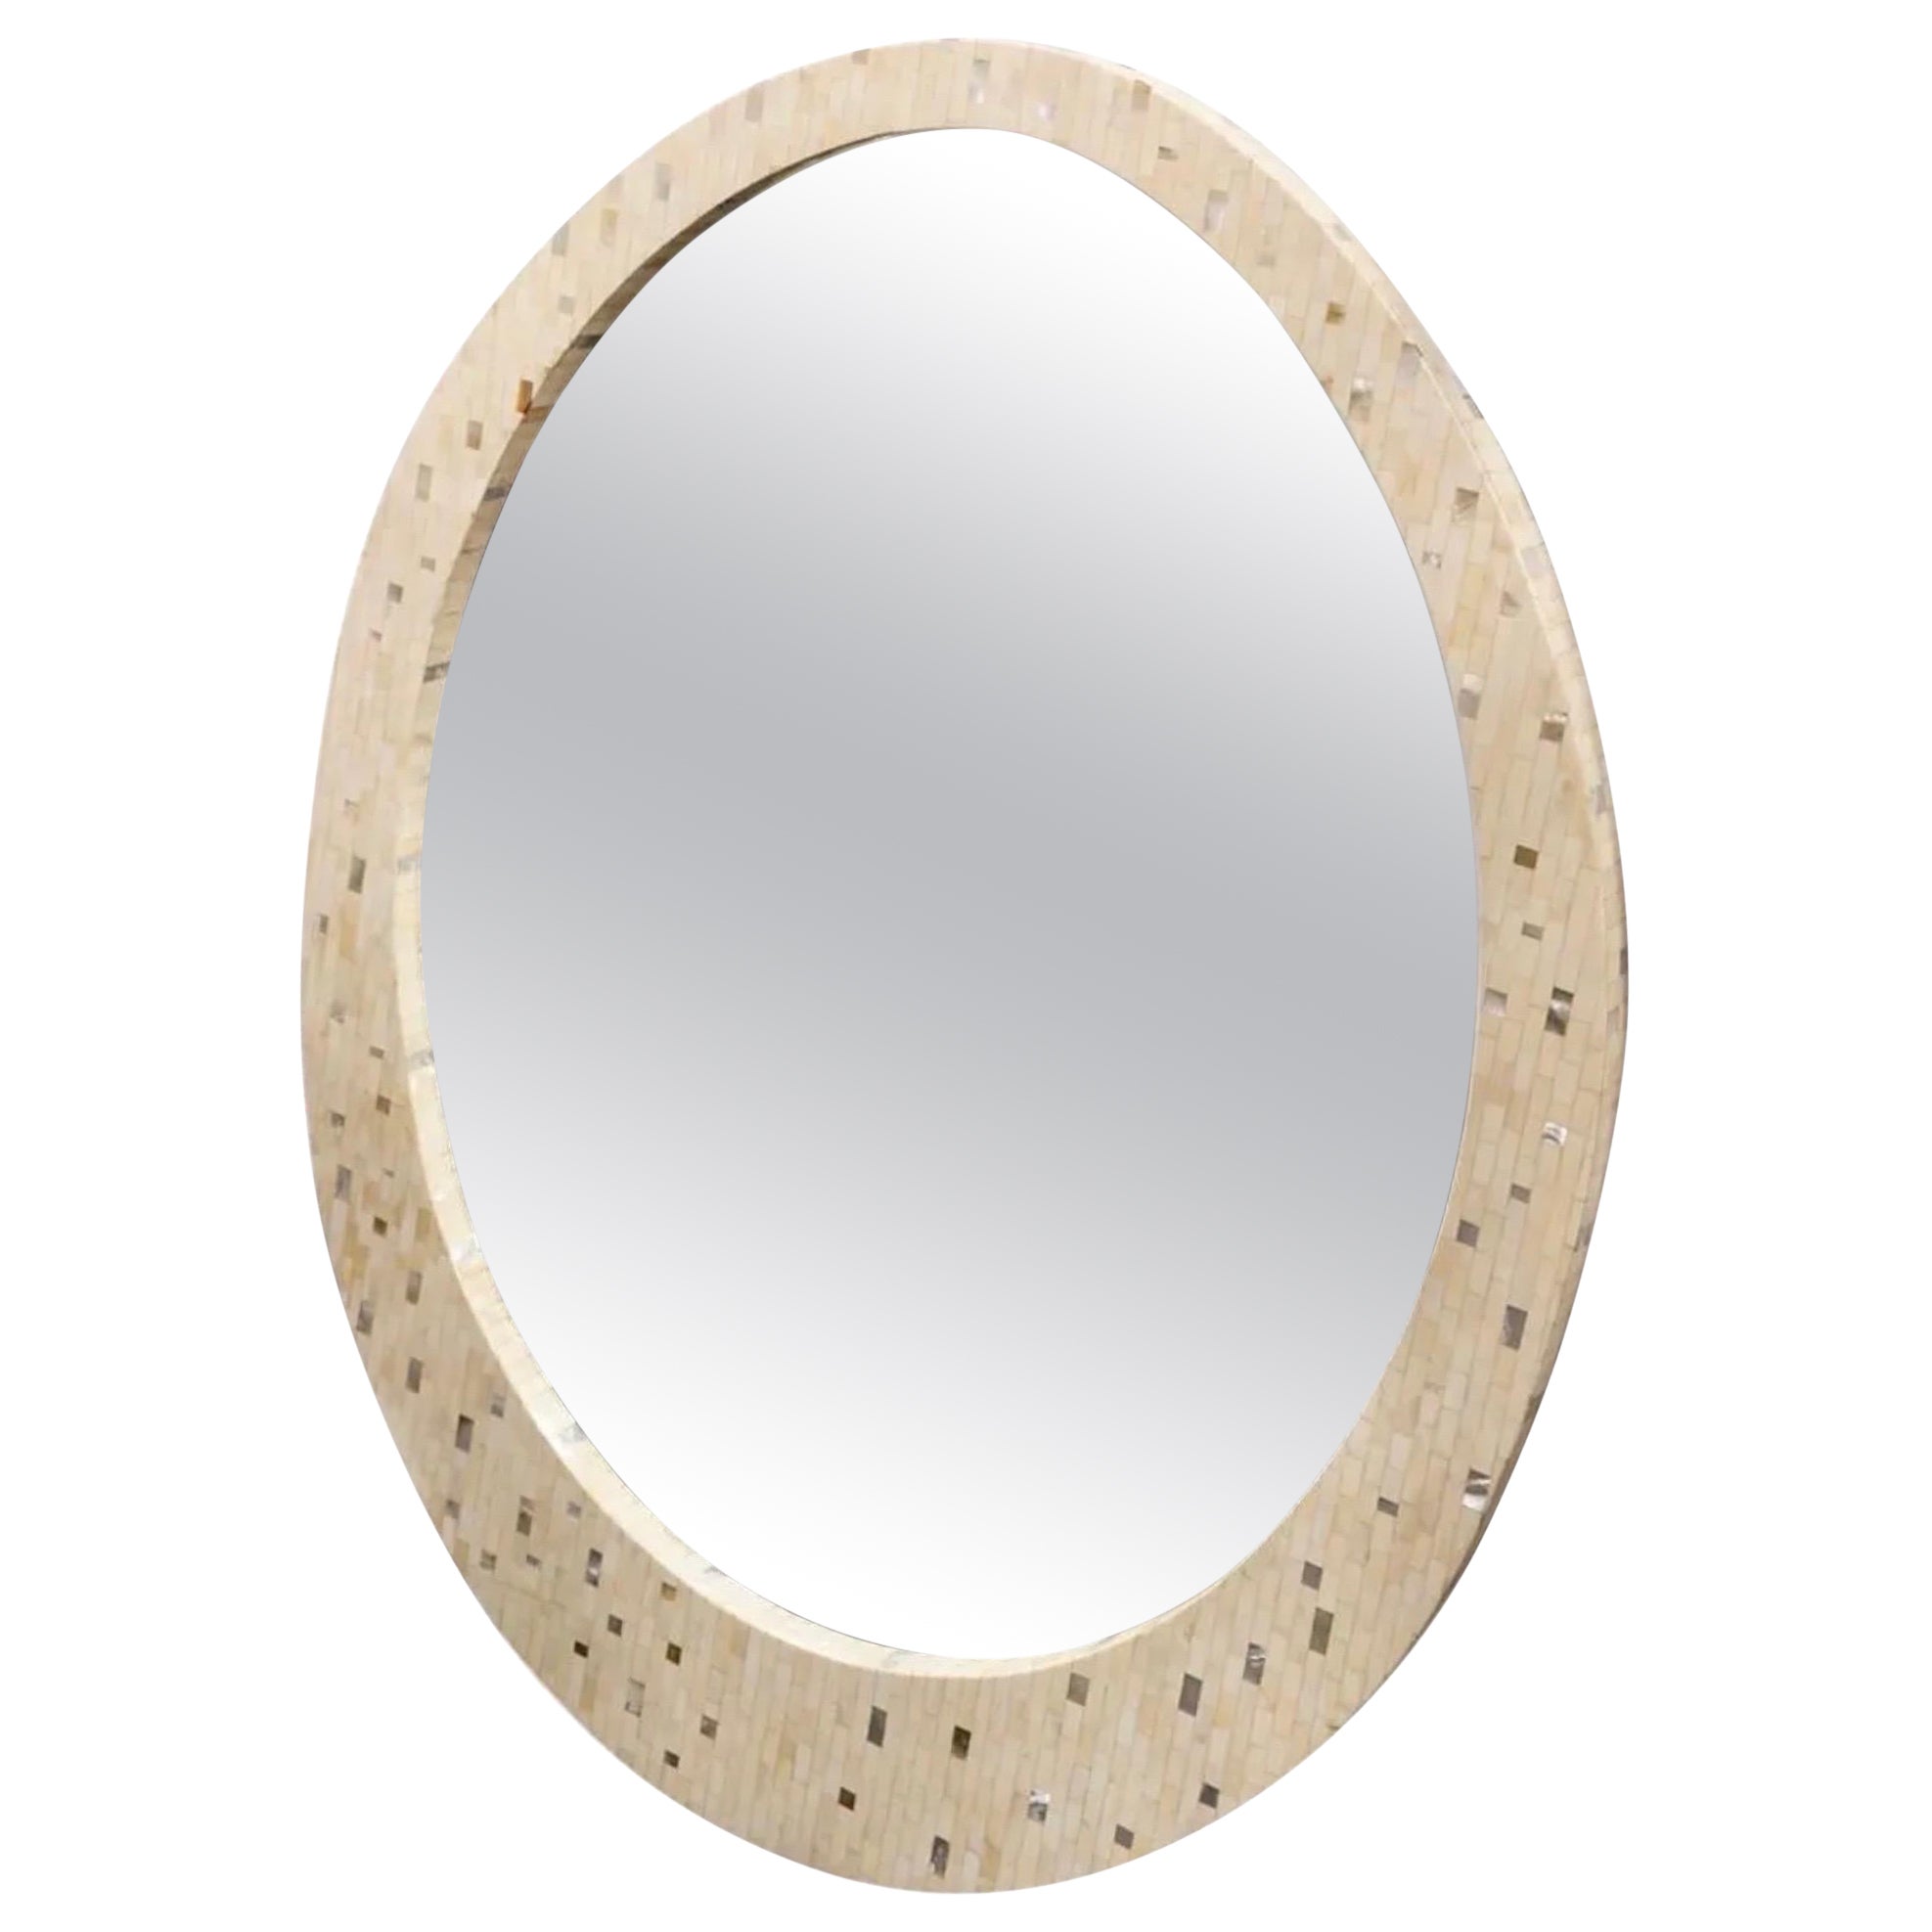 Ron Seff Egg Form Bone & Mother of Pearl Inlaid Mirror For Sale